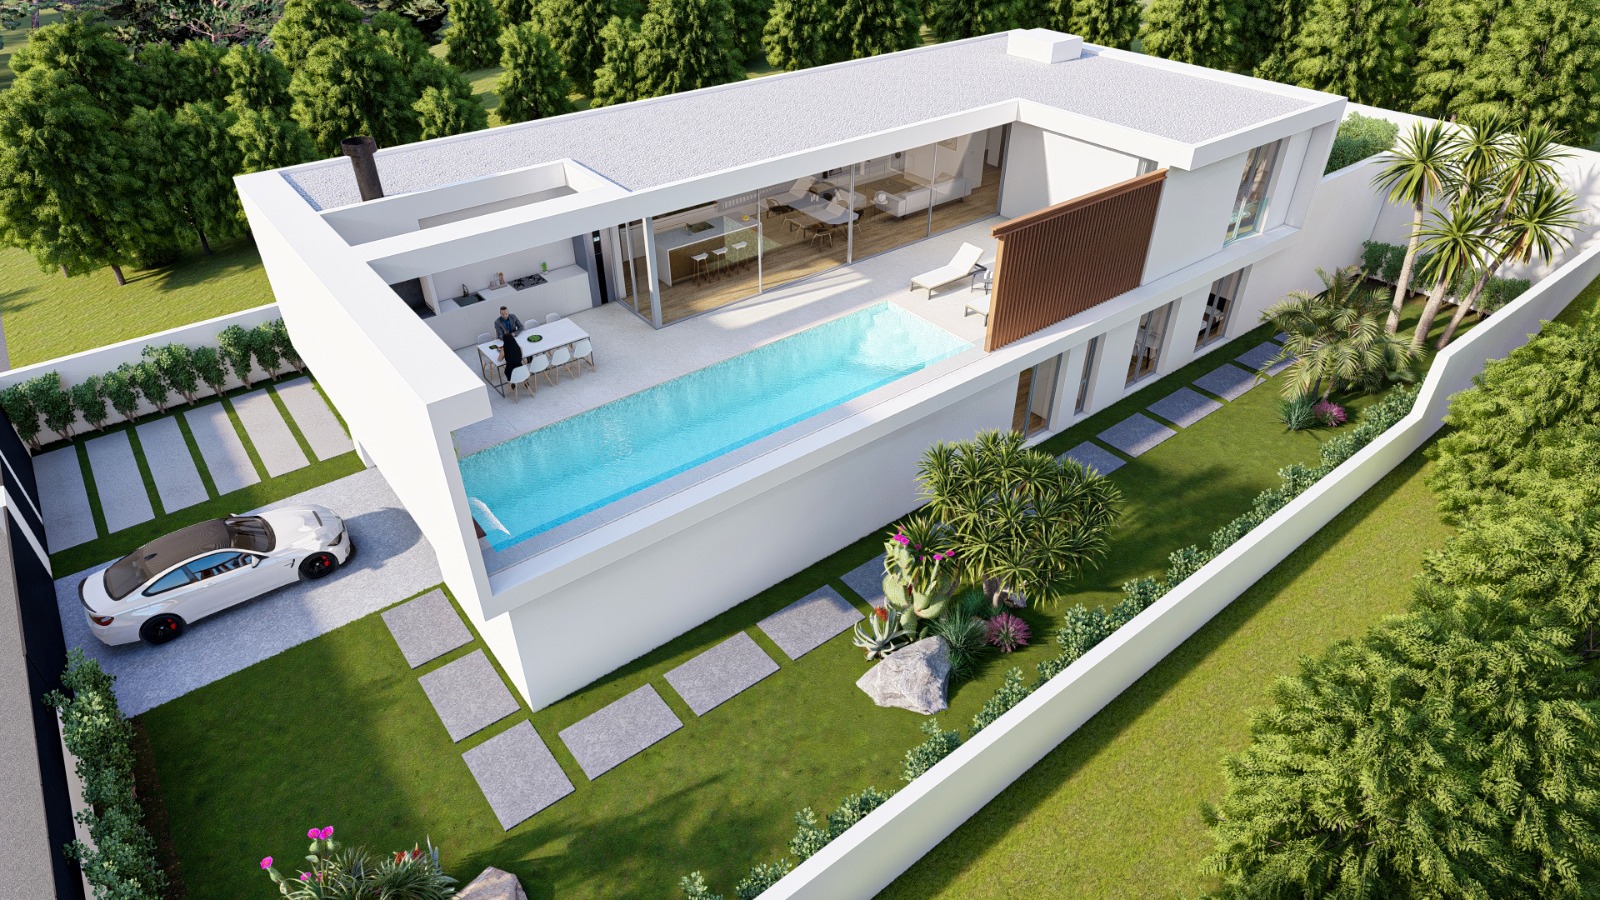 Sale of luxury Villa in Calpe, Pla Roig with four bedrooms and four en-suite bathrooms, swimming pool and barbecue area with solarium.